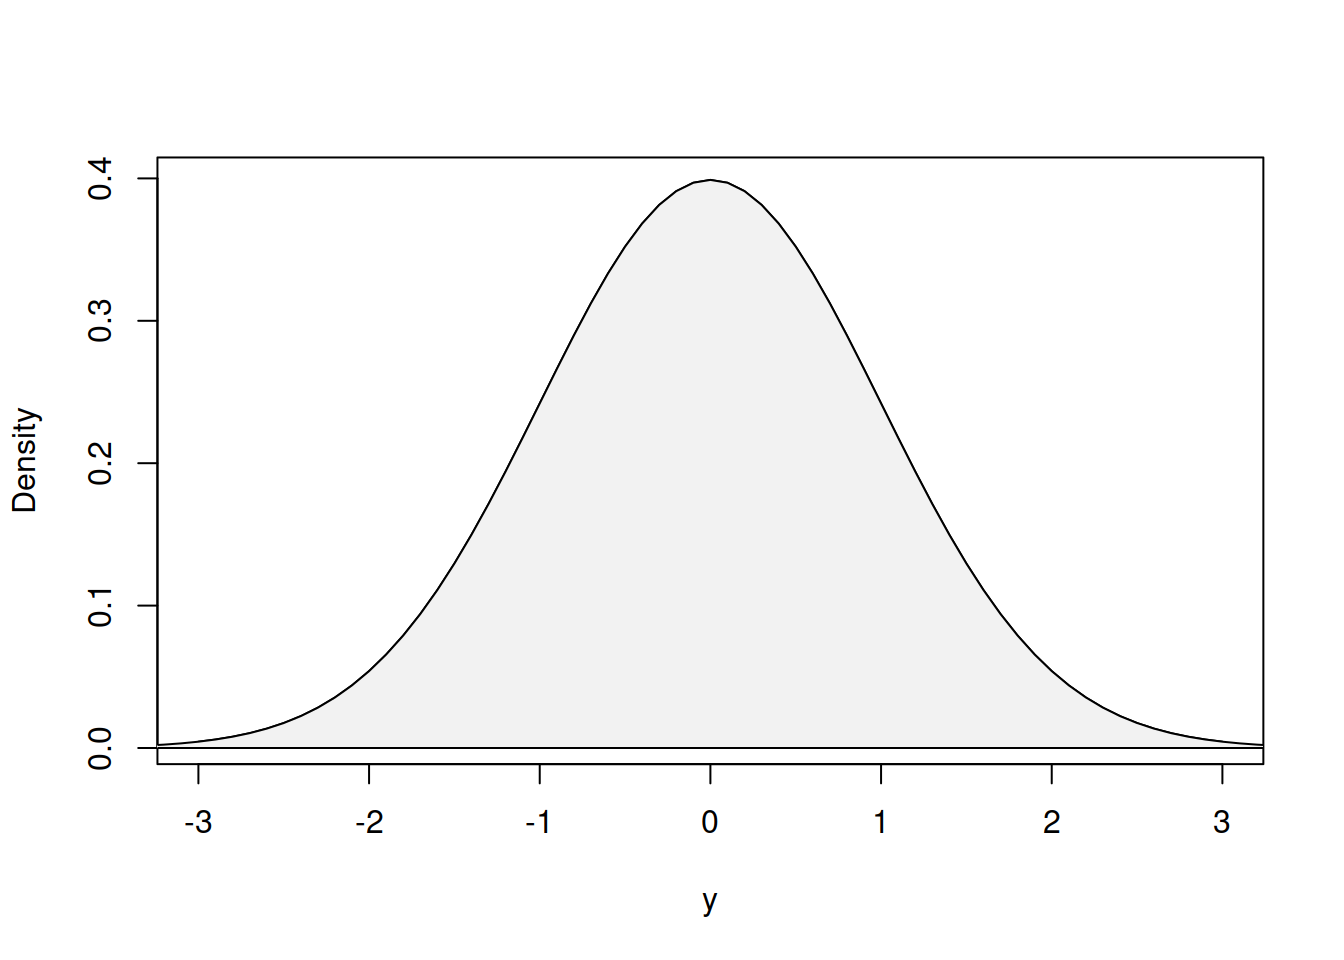 Probability Density Function of Normal distribution